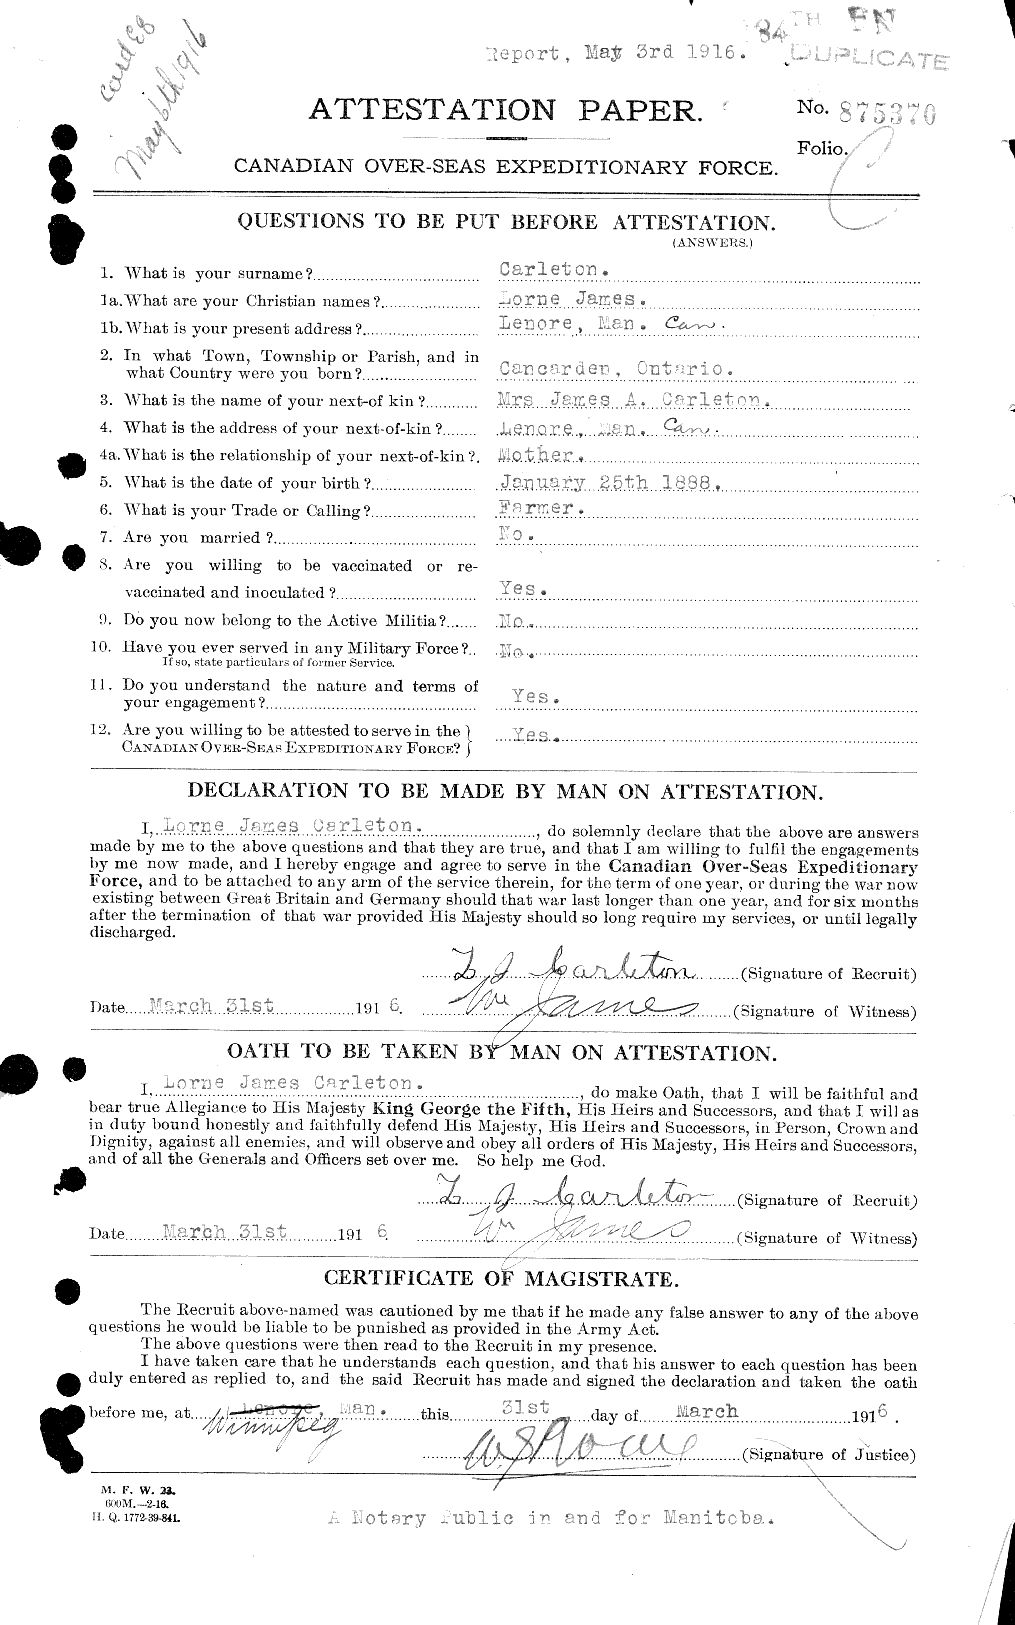 Personnel Records of the First World War - CEF 009570a